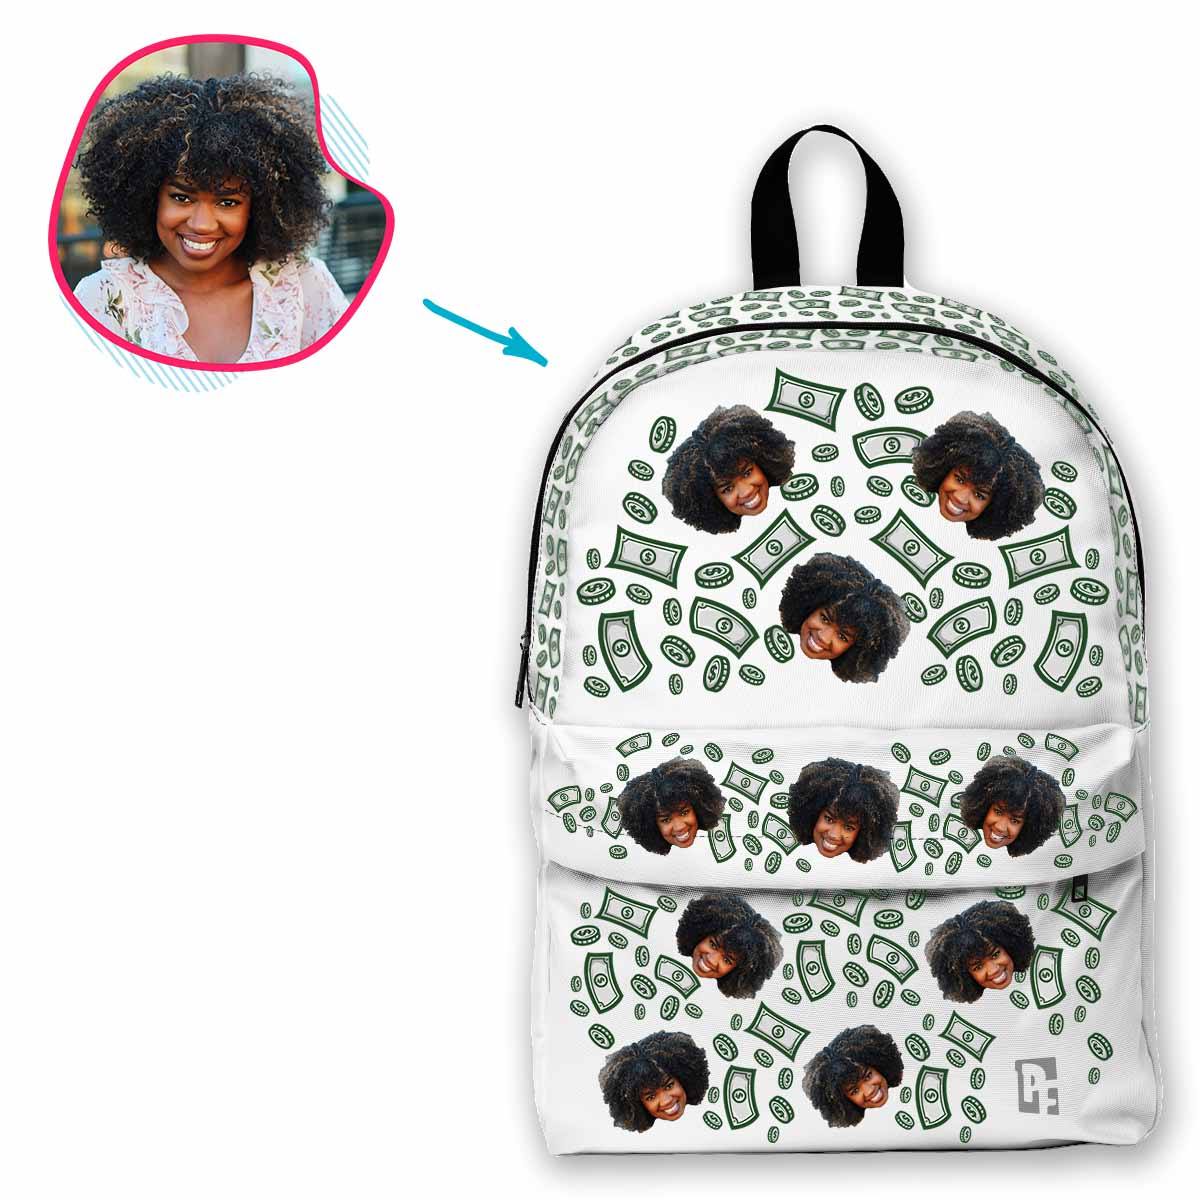 white Money classic backpack personalized with photo of face printed on it